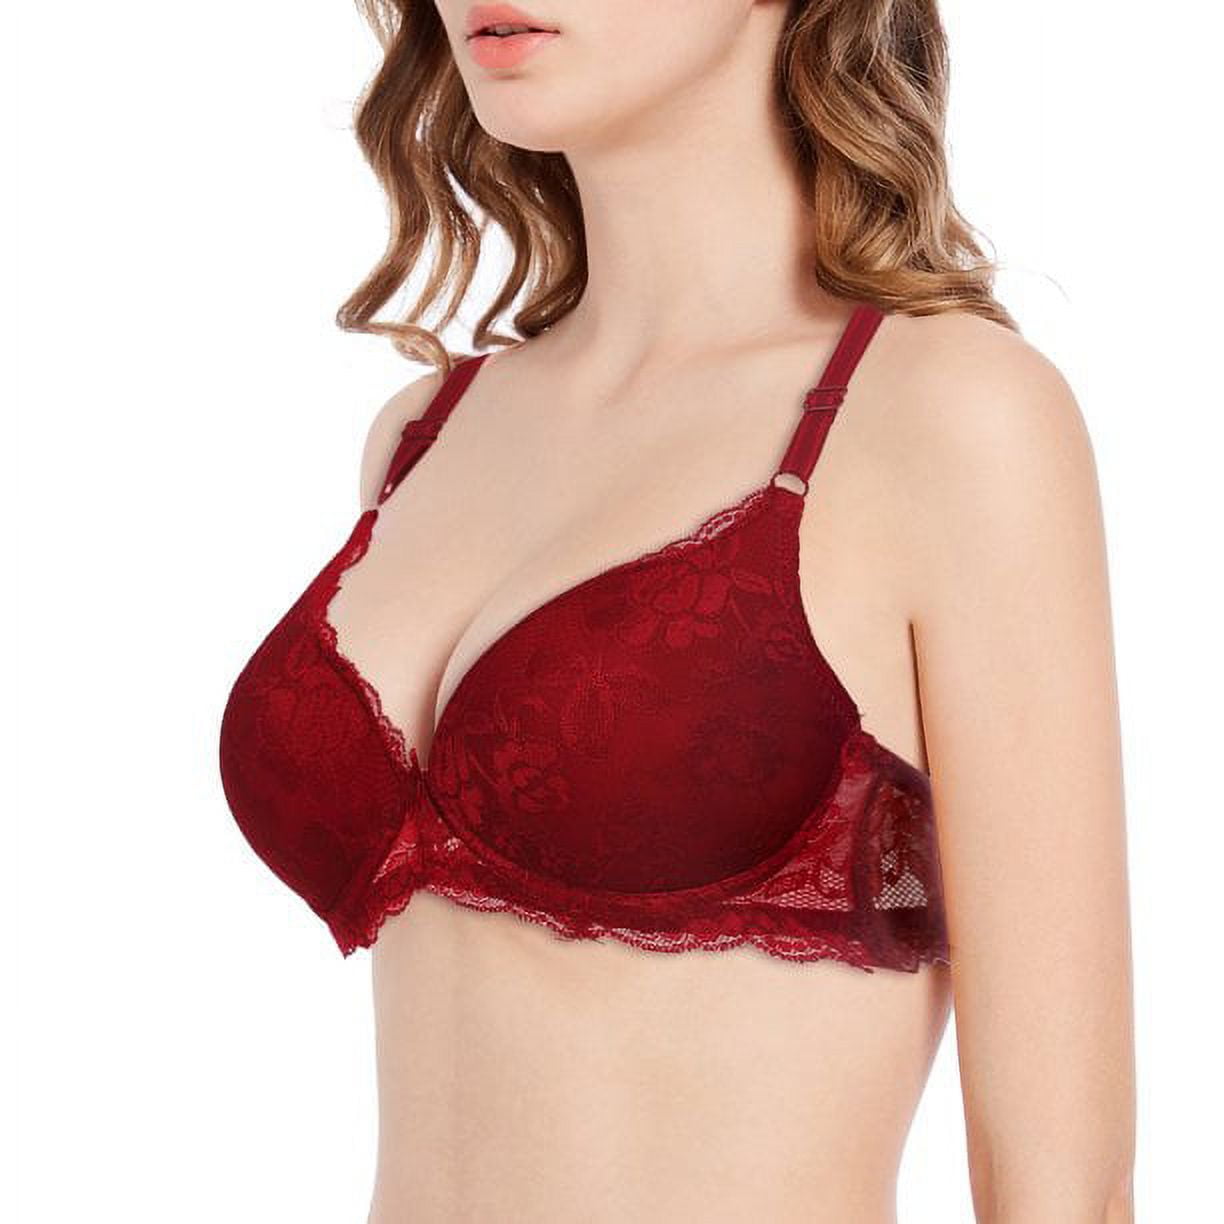 Mamia & Sofra IN-BR4324LPU-32B Lace Push Up Bra - Size 32B - Pack